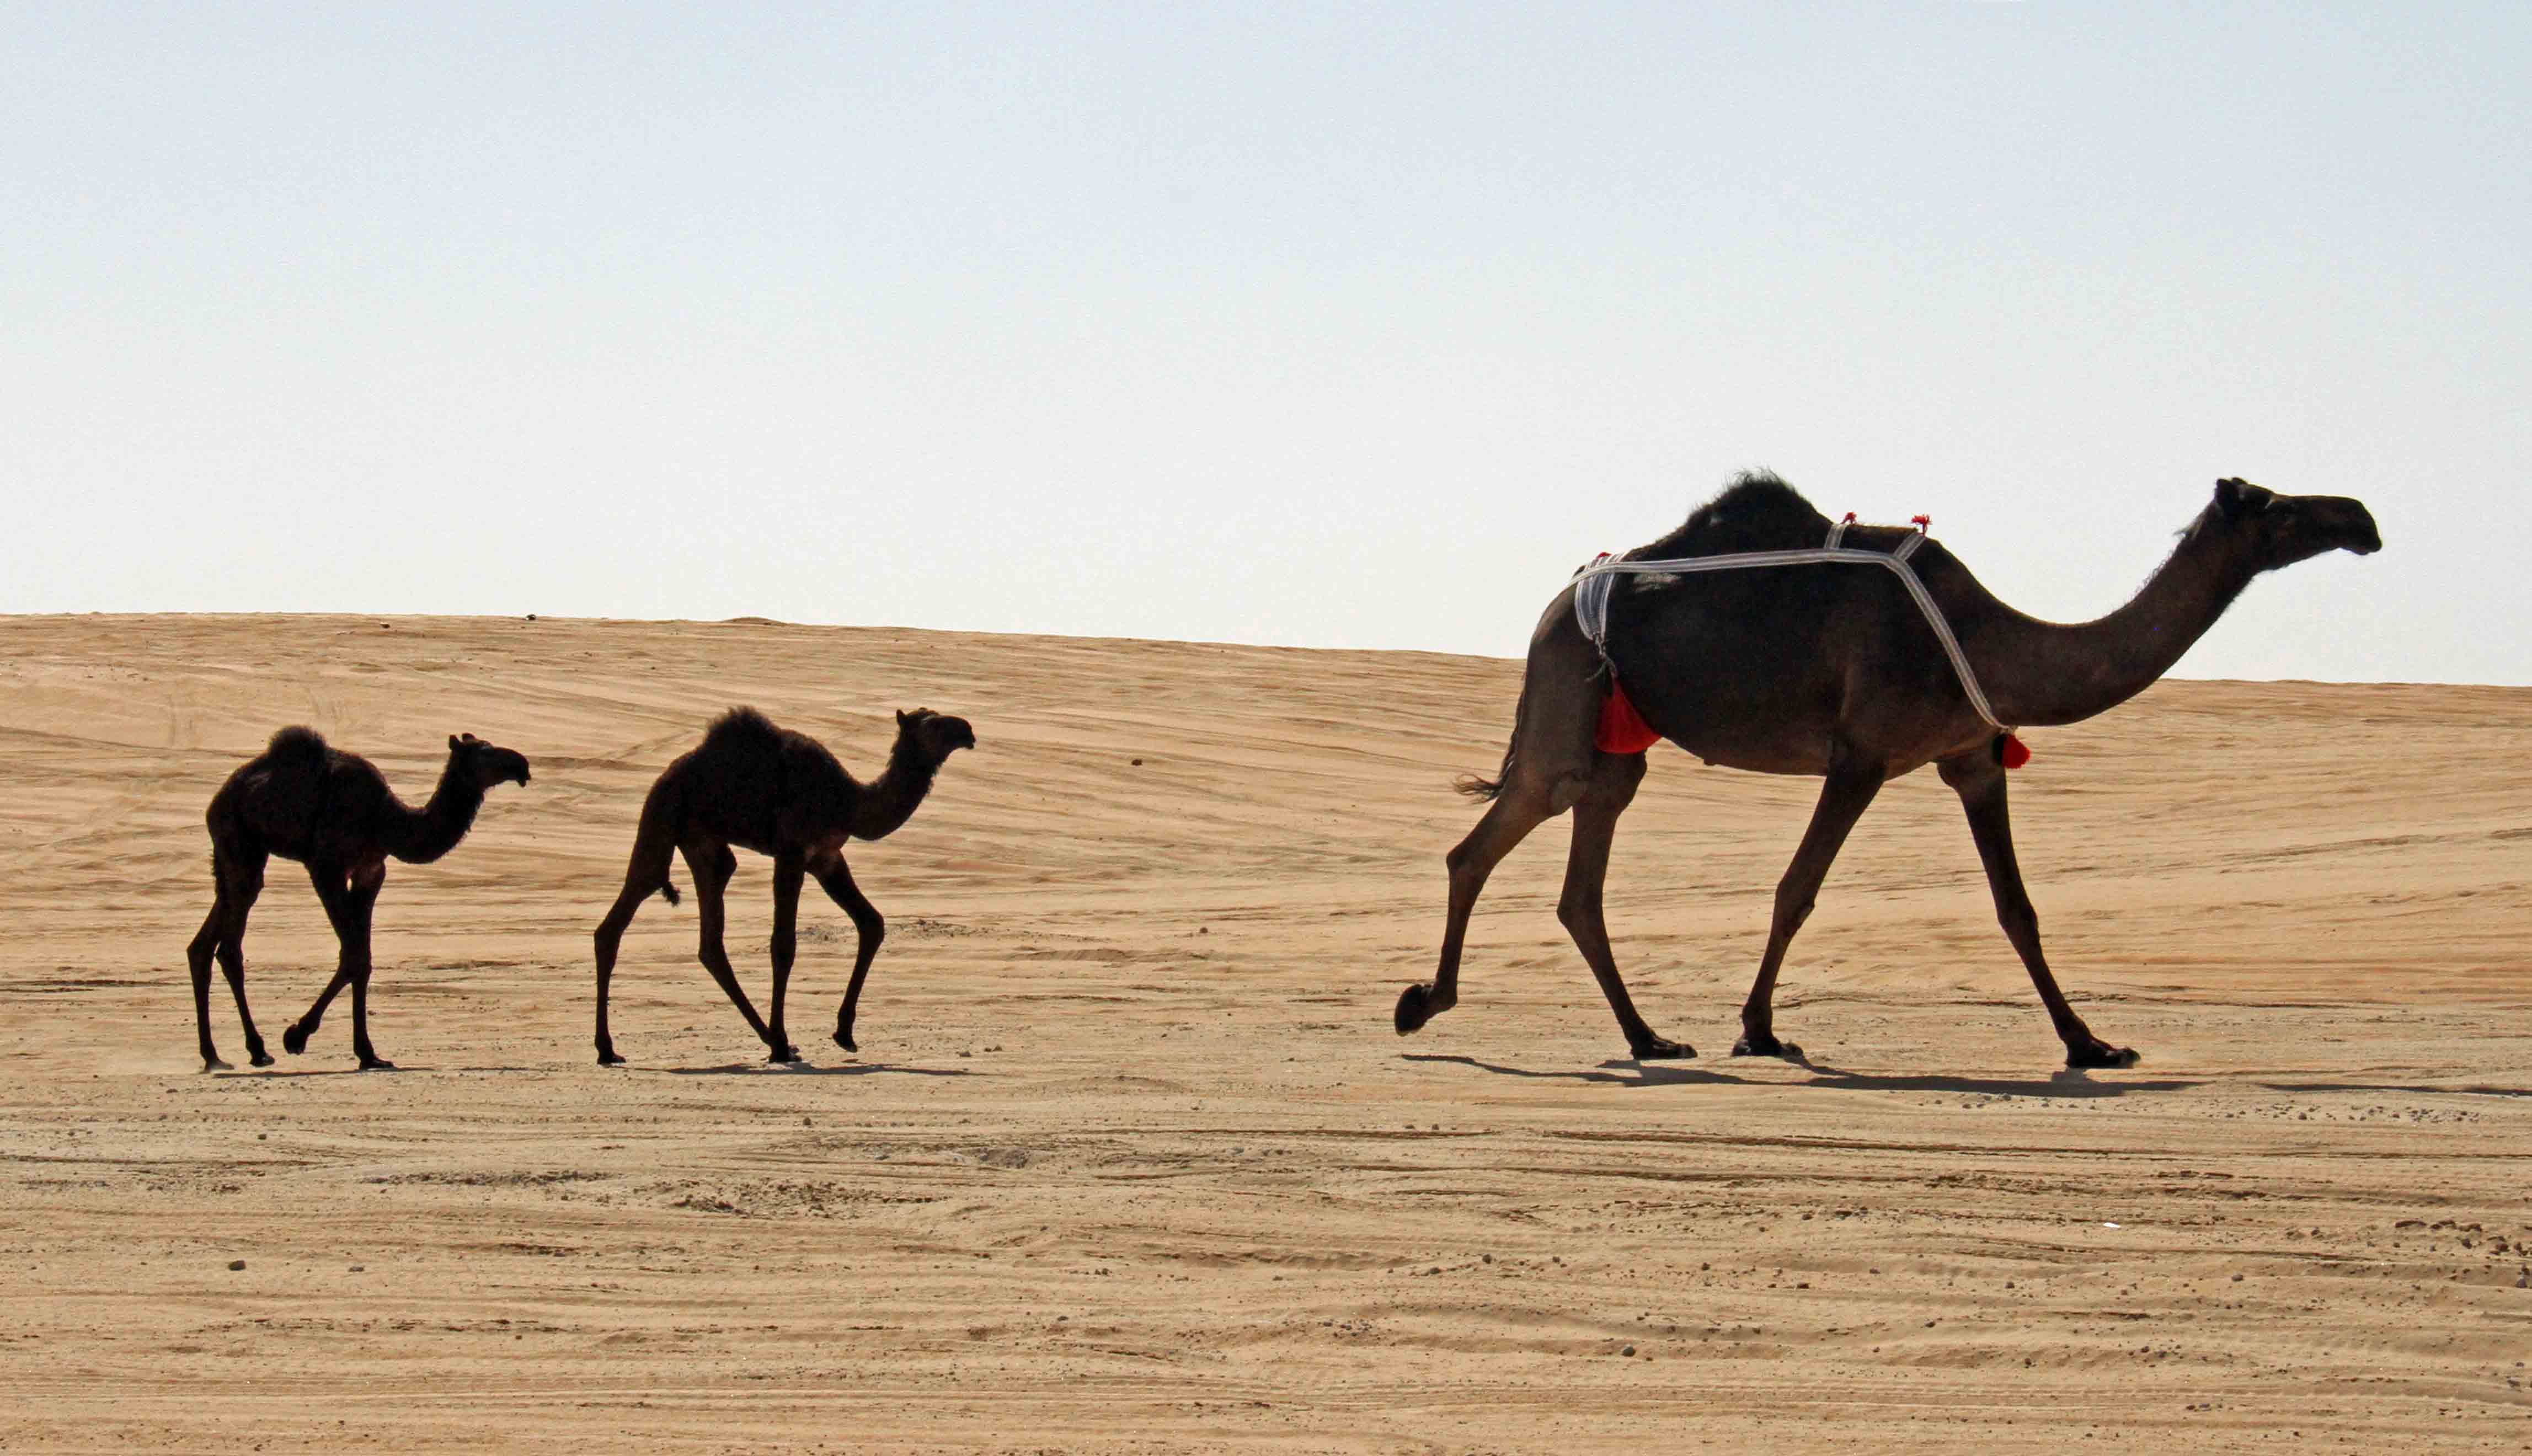 A mother camel and her two young camels trailing behind.